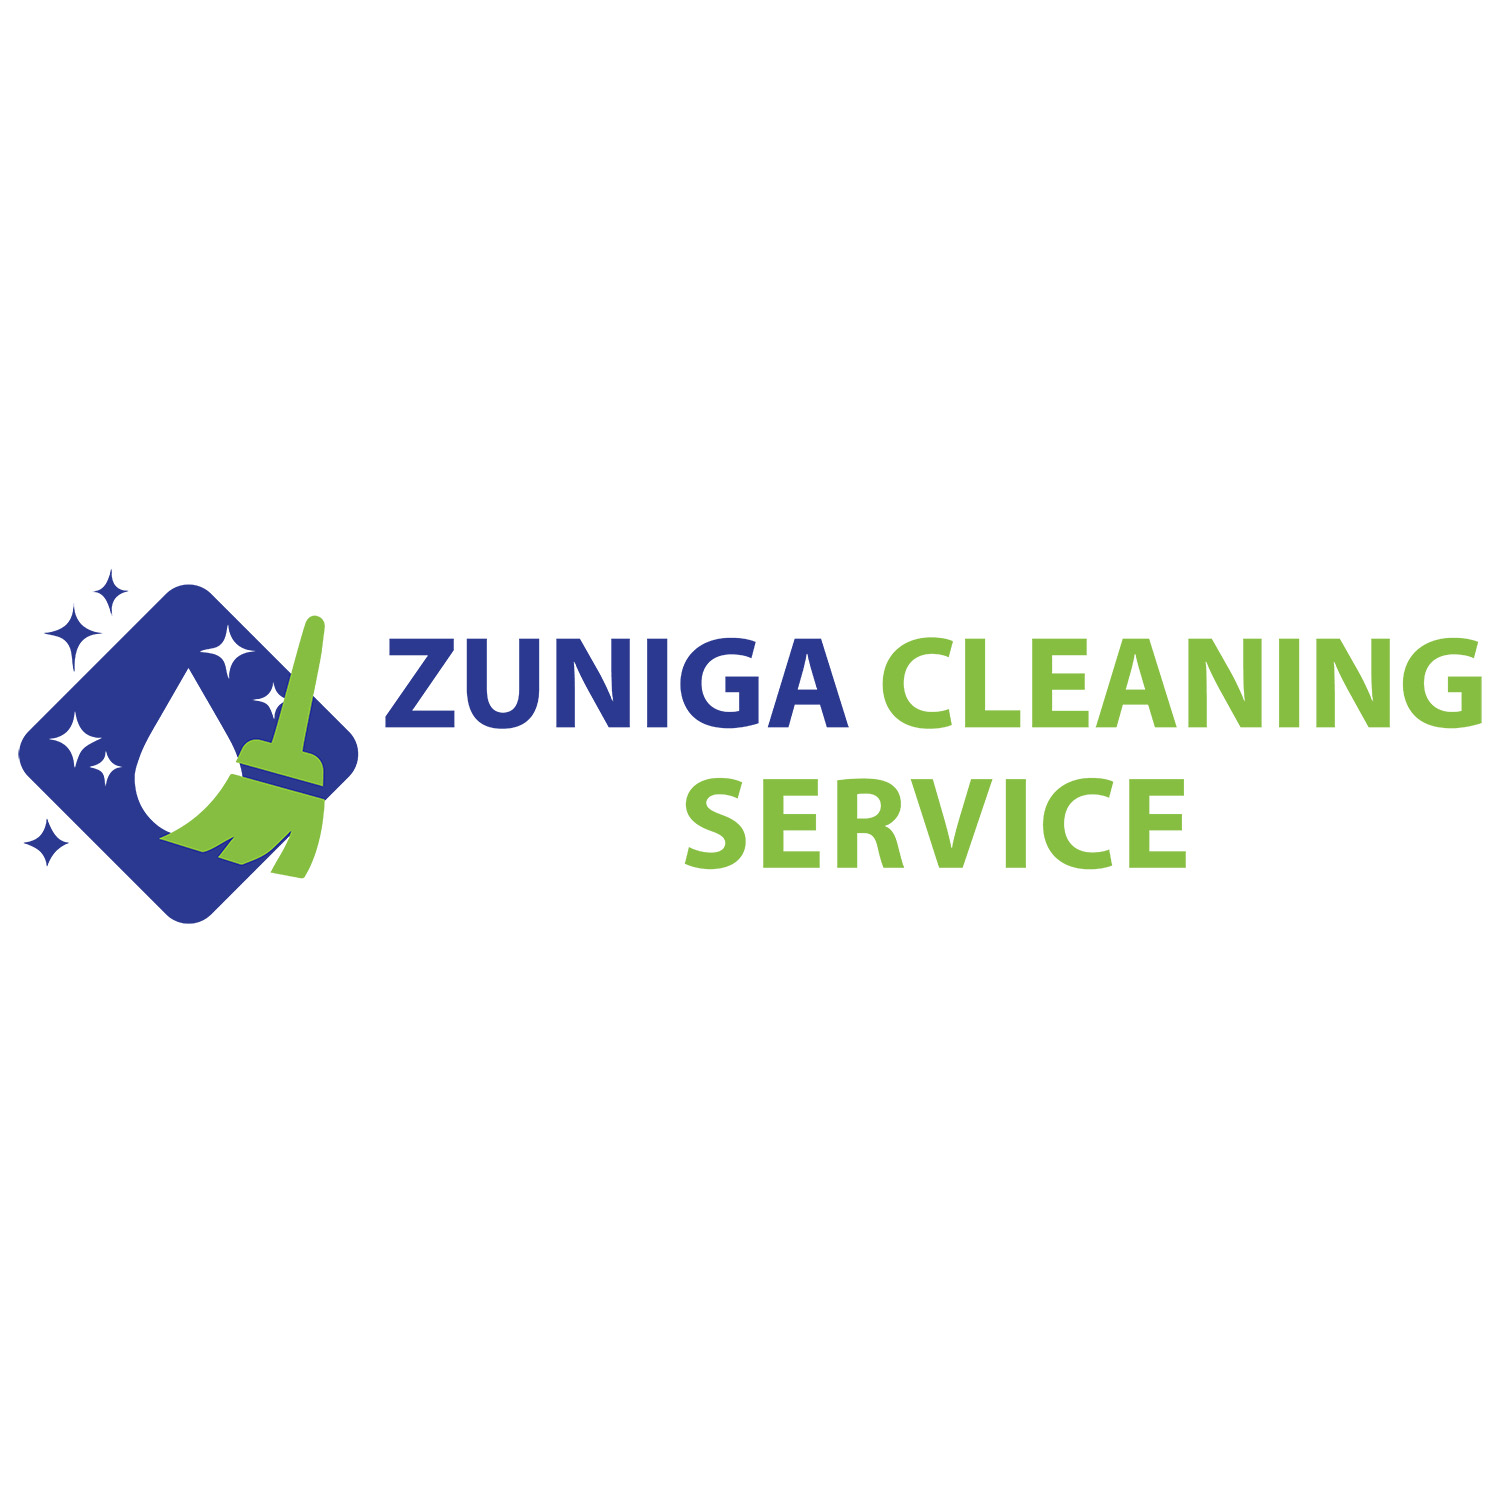 E&E Cleaning Services